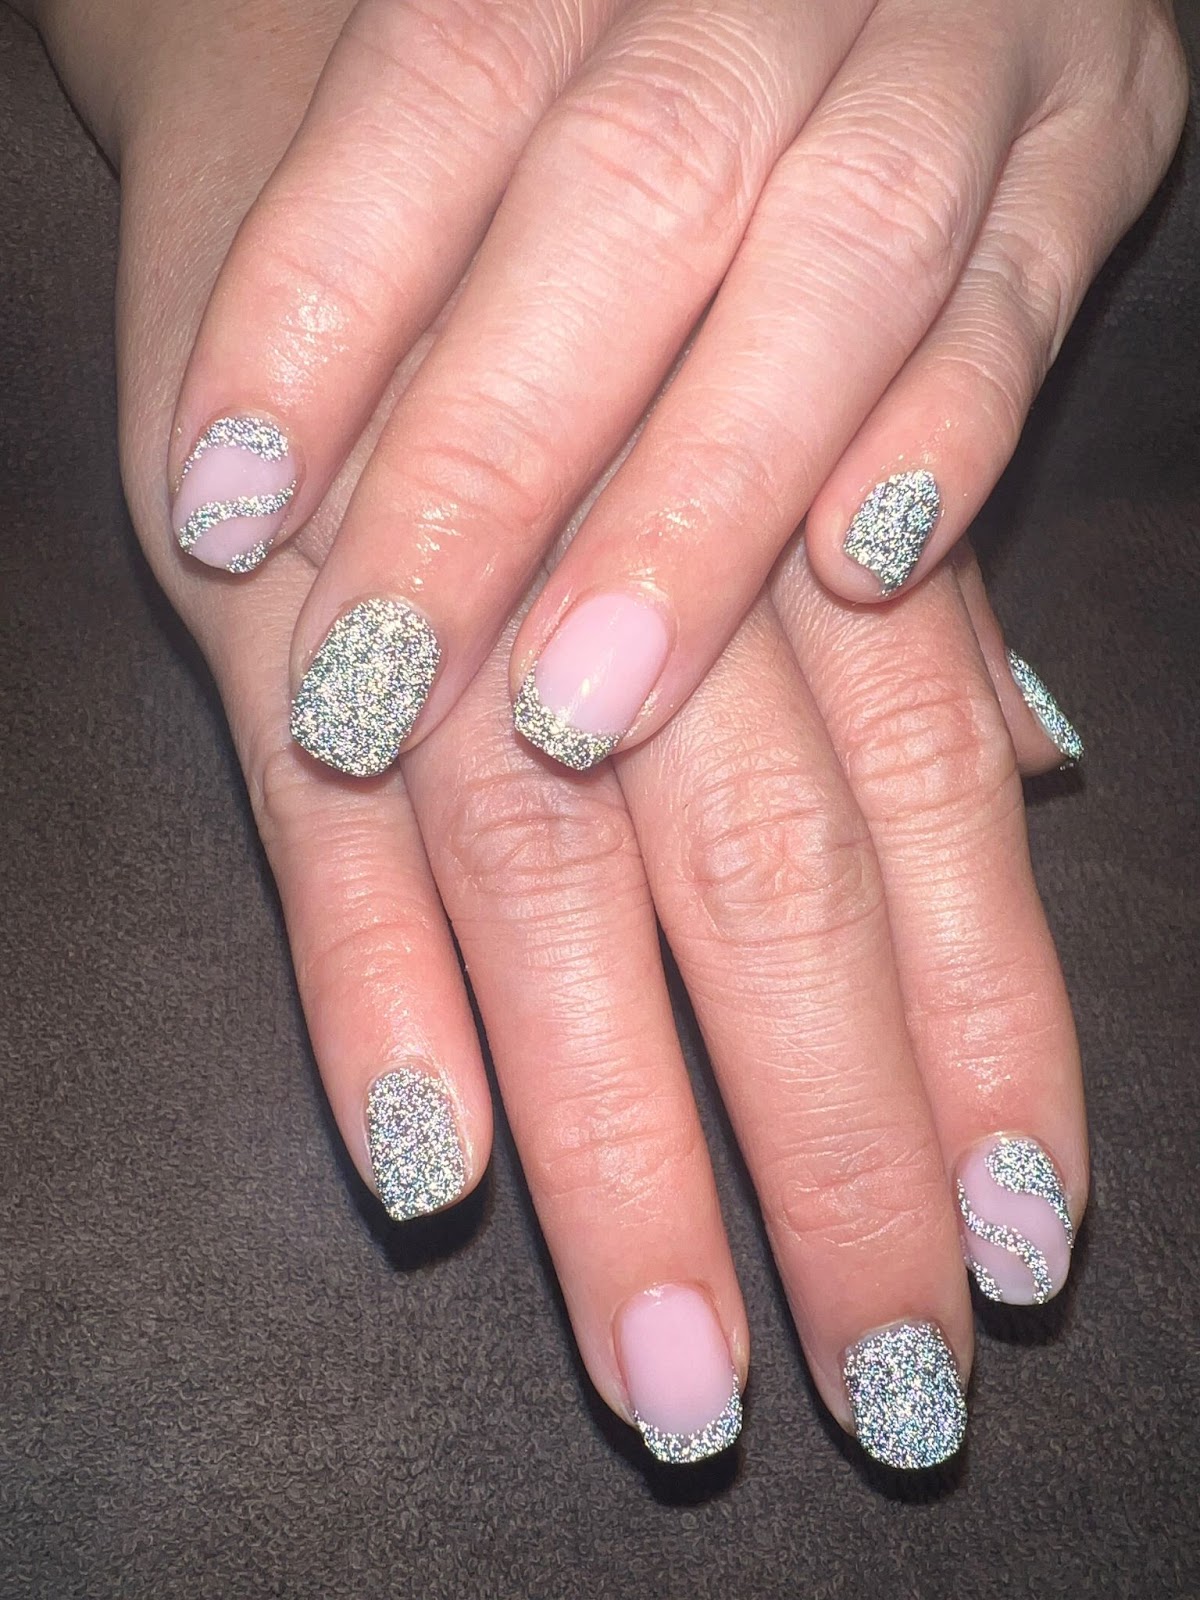 Glittery holiday nails shining in the light